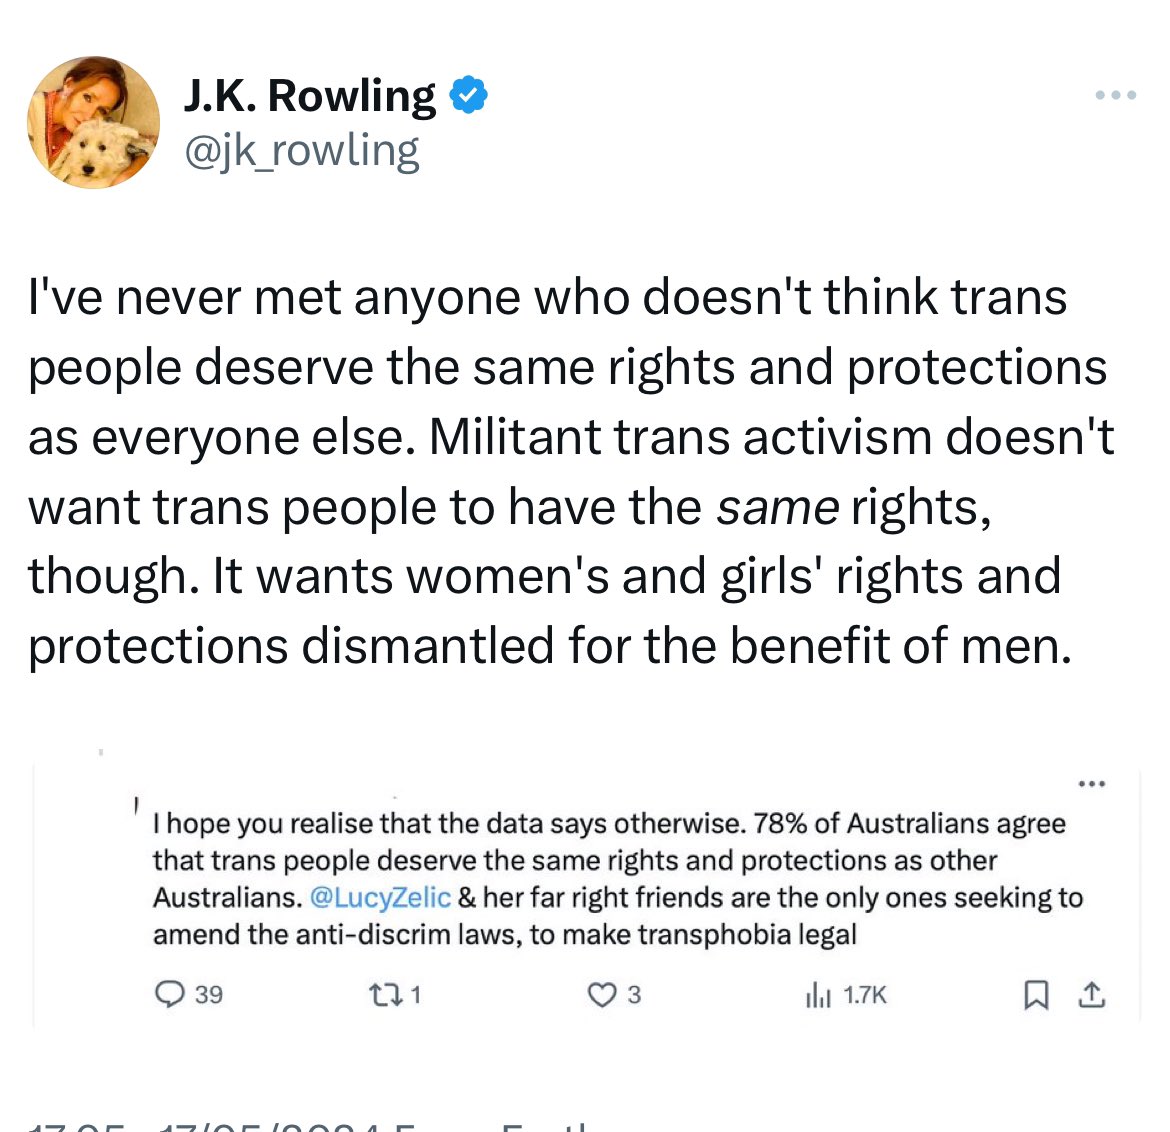 Trans women have had their rights in law to use female bathrooms since 2010, & were using them before that. Did this impact women’s rights & safety? No. JK Rowling, like all anti-trans activists, want to remove these rights & force trans women into spaces that will endanger them